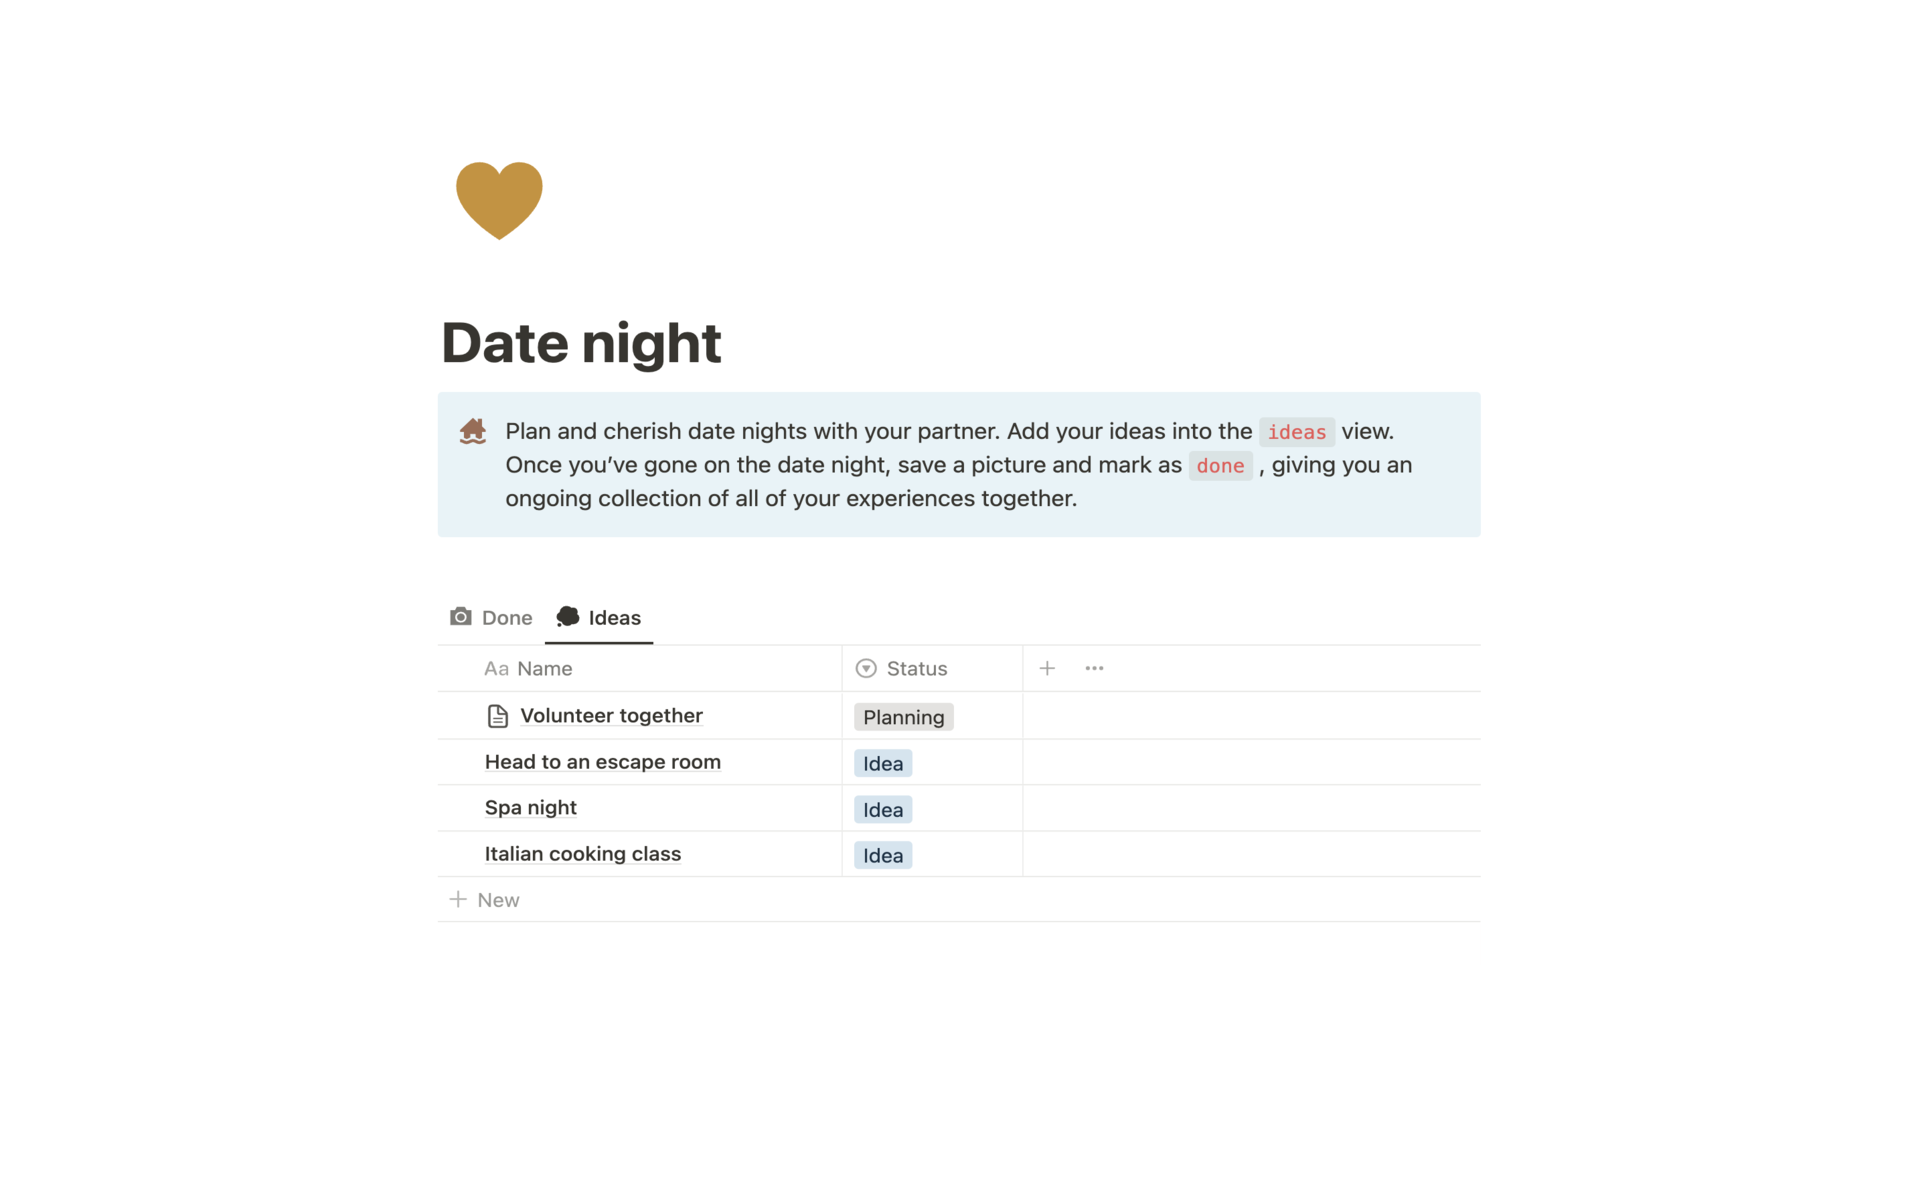 Plan and cherish date nights with your partner.
